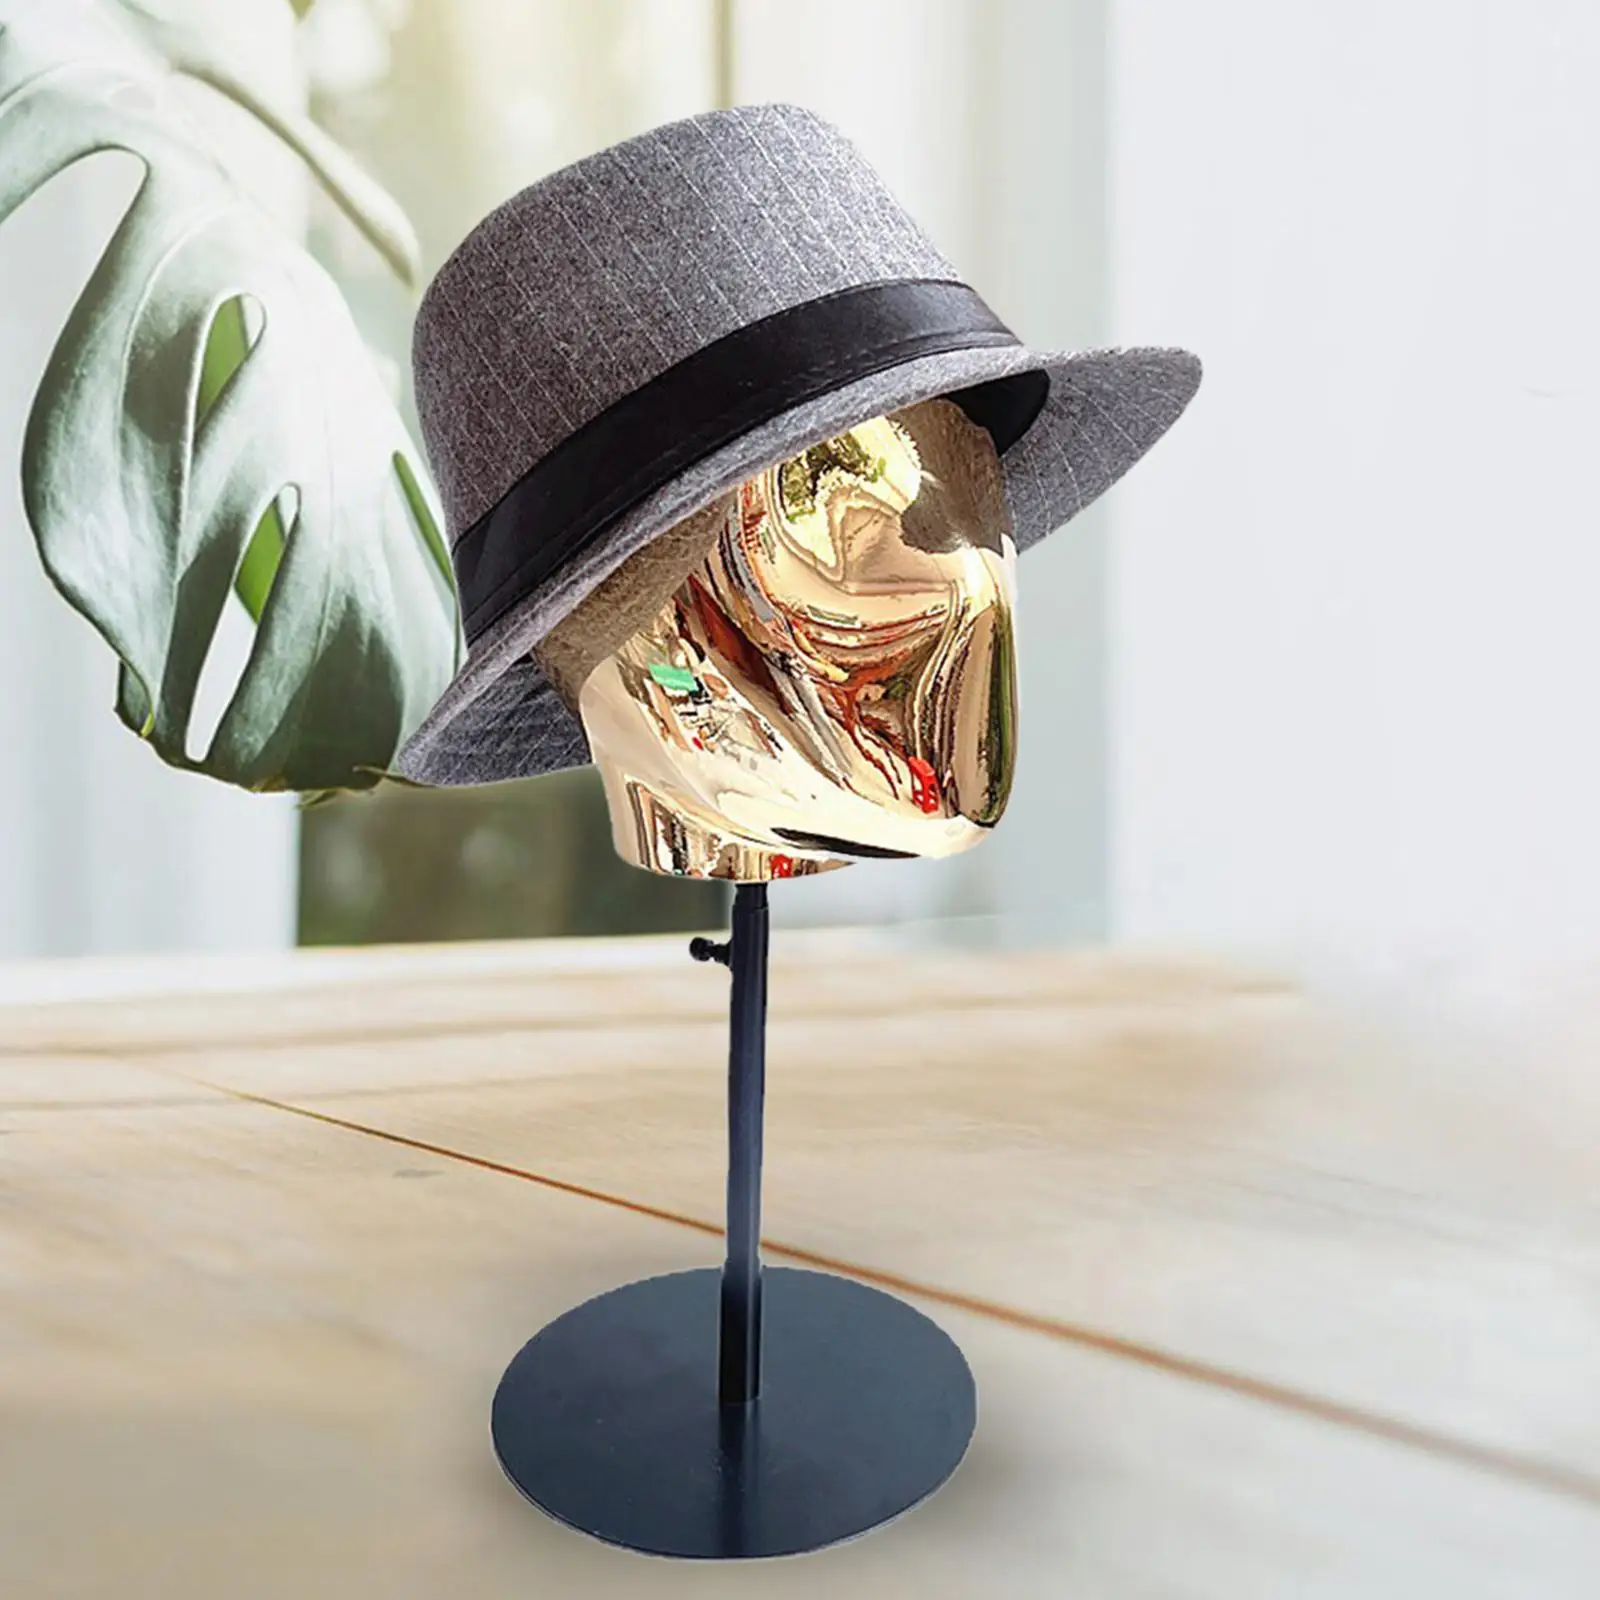 Mannequin Head Model Jewelry Wig Hat Display Stand Holder Stable Base for Home and Beauty Salon or Shop